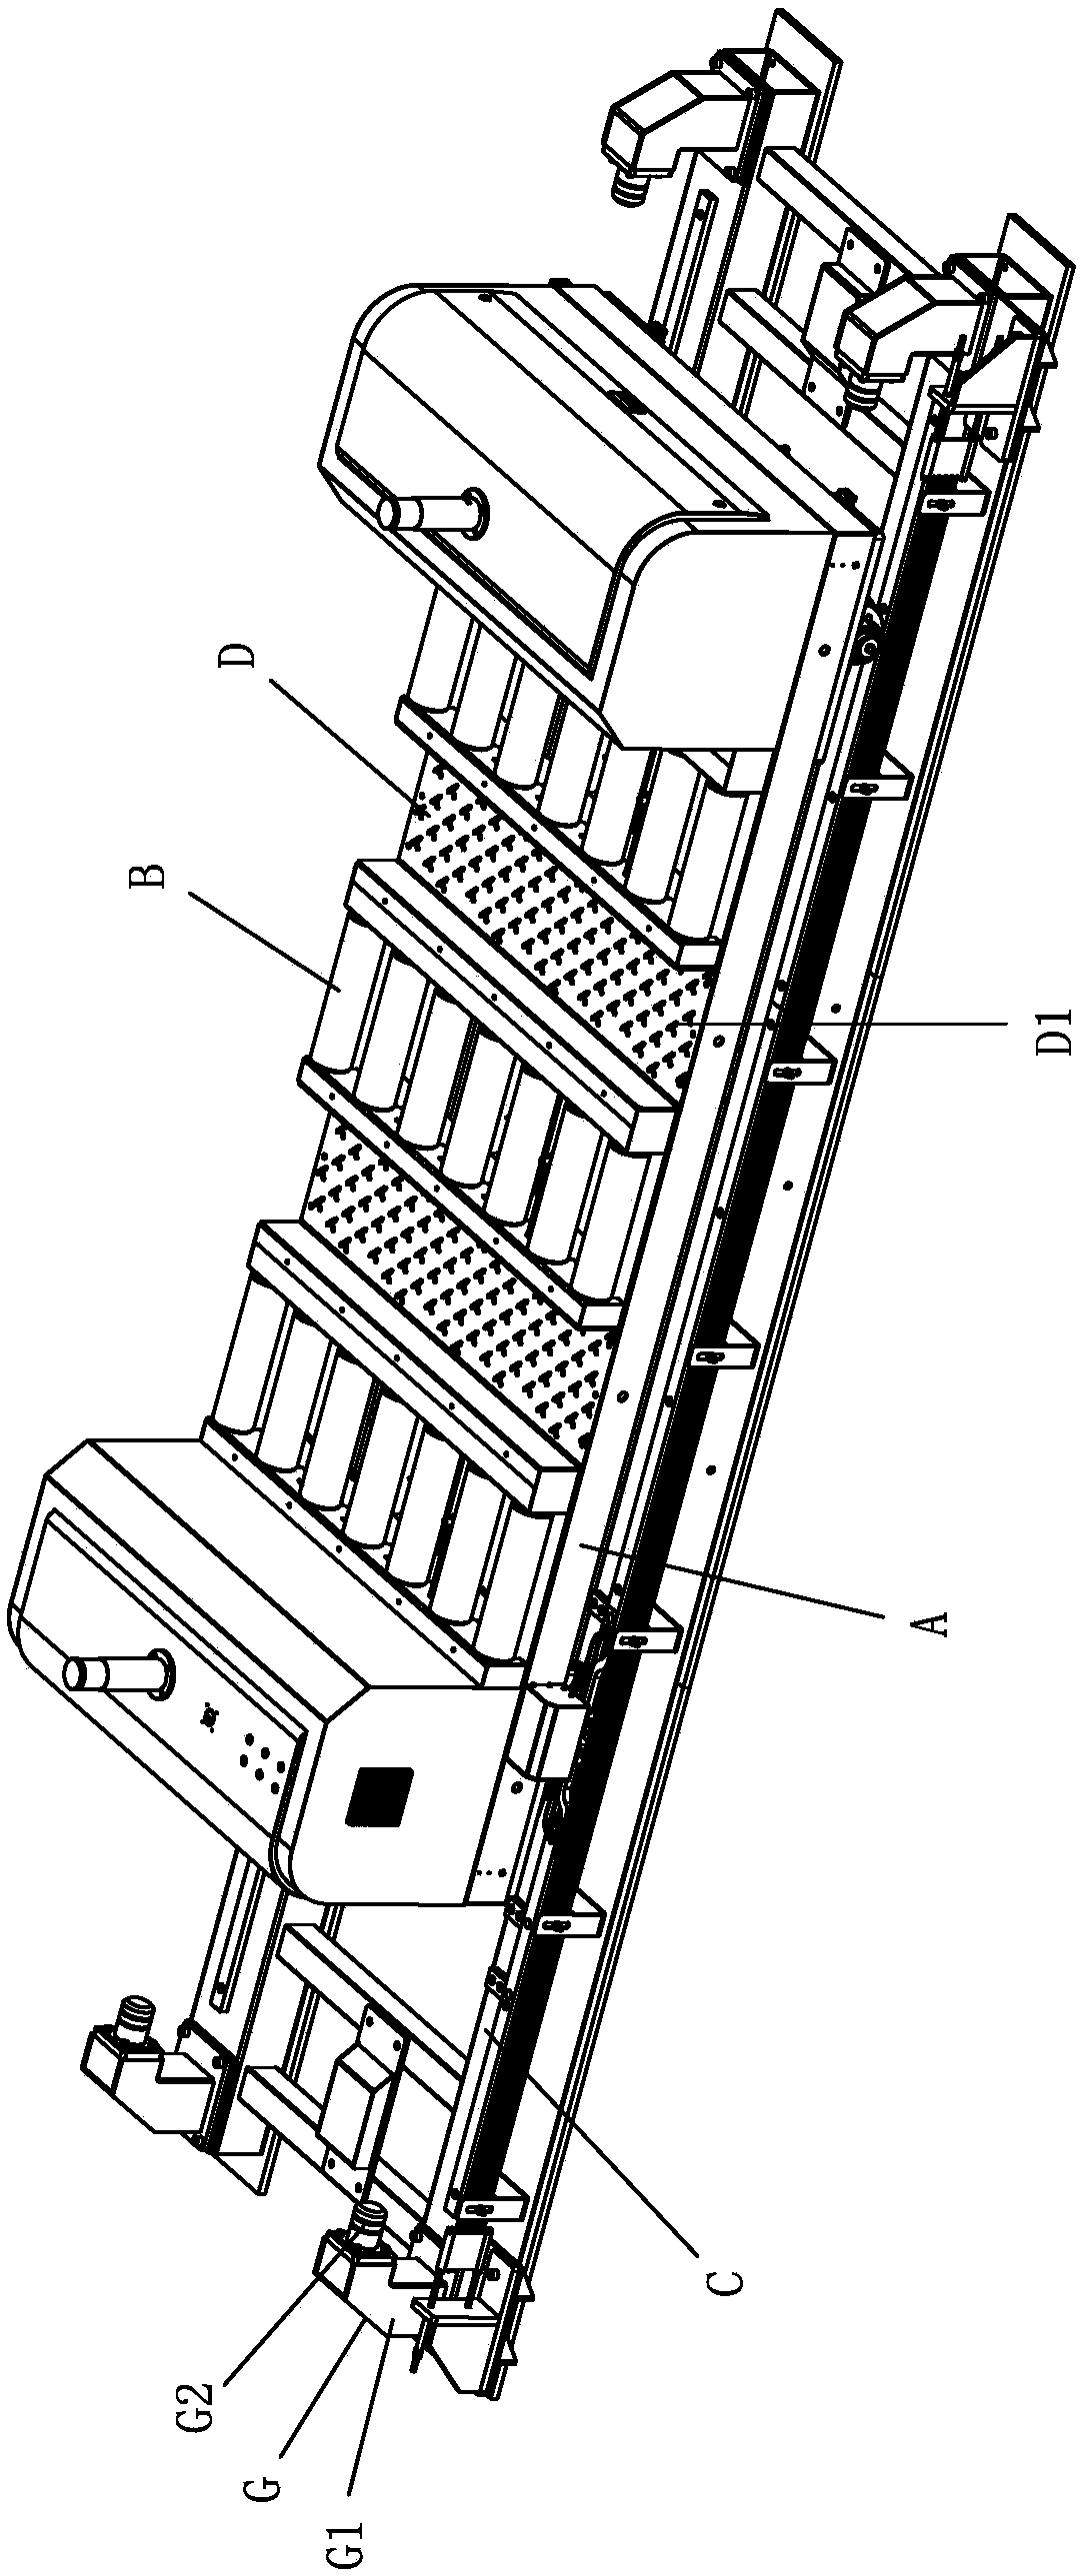 Rail guided vehicle with fork-position transverse transmission function